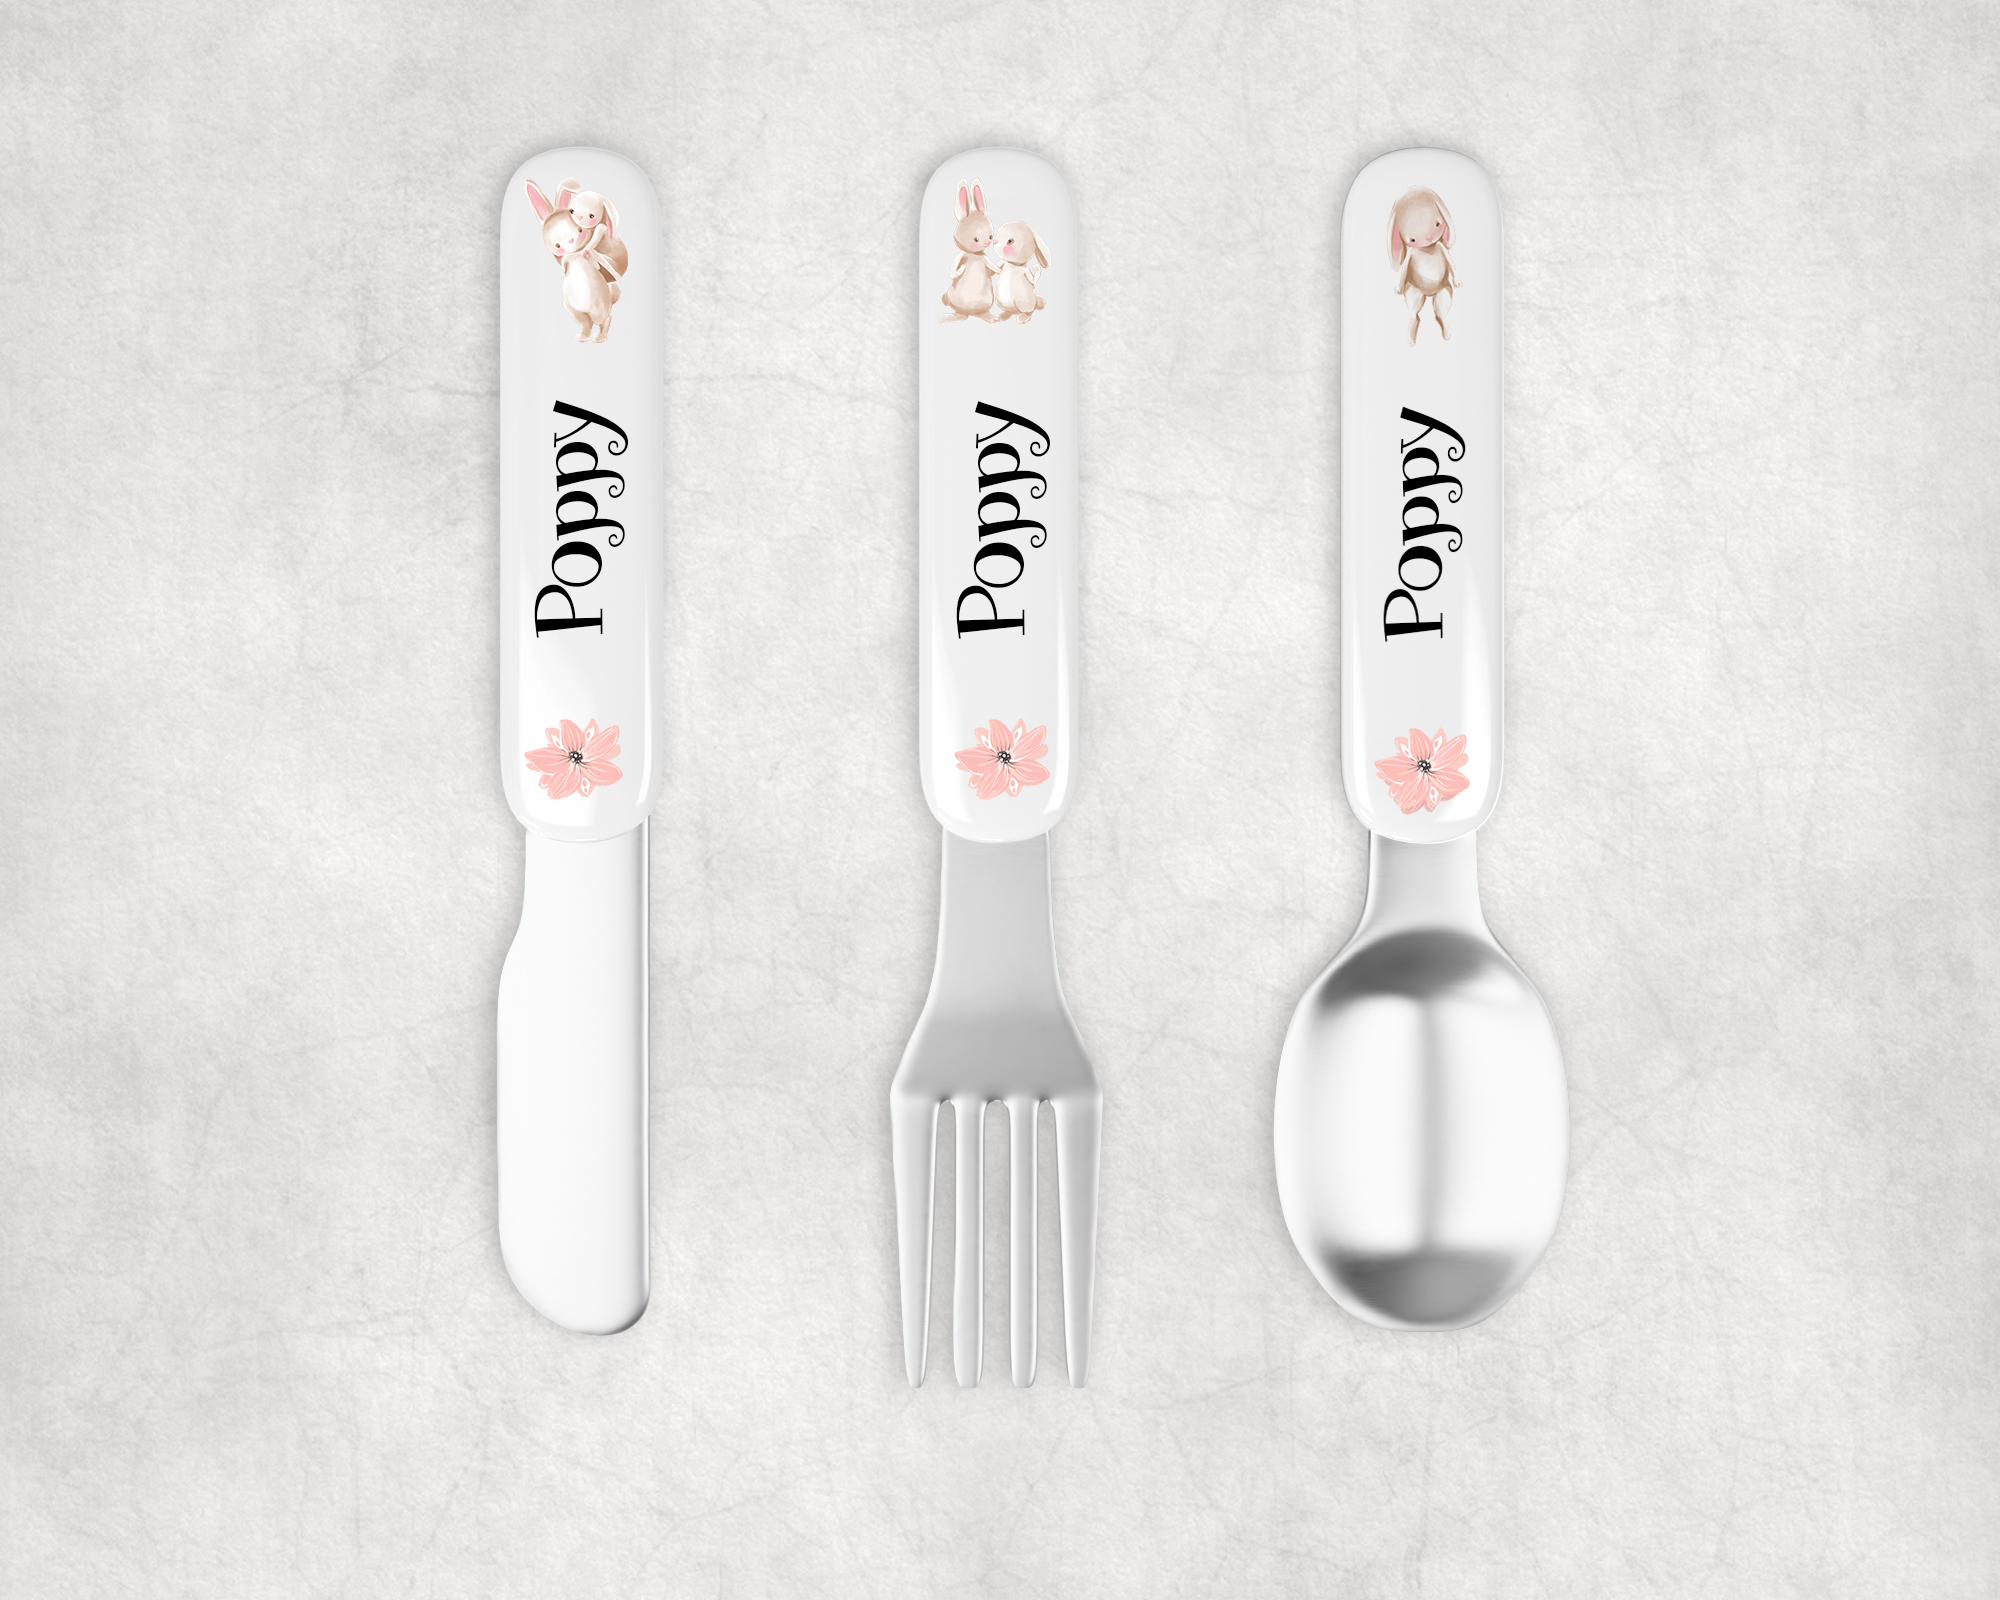 Children's personalised cutlery set with bunnies in love design